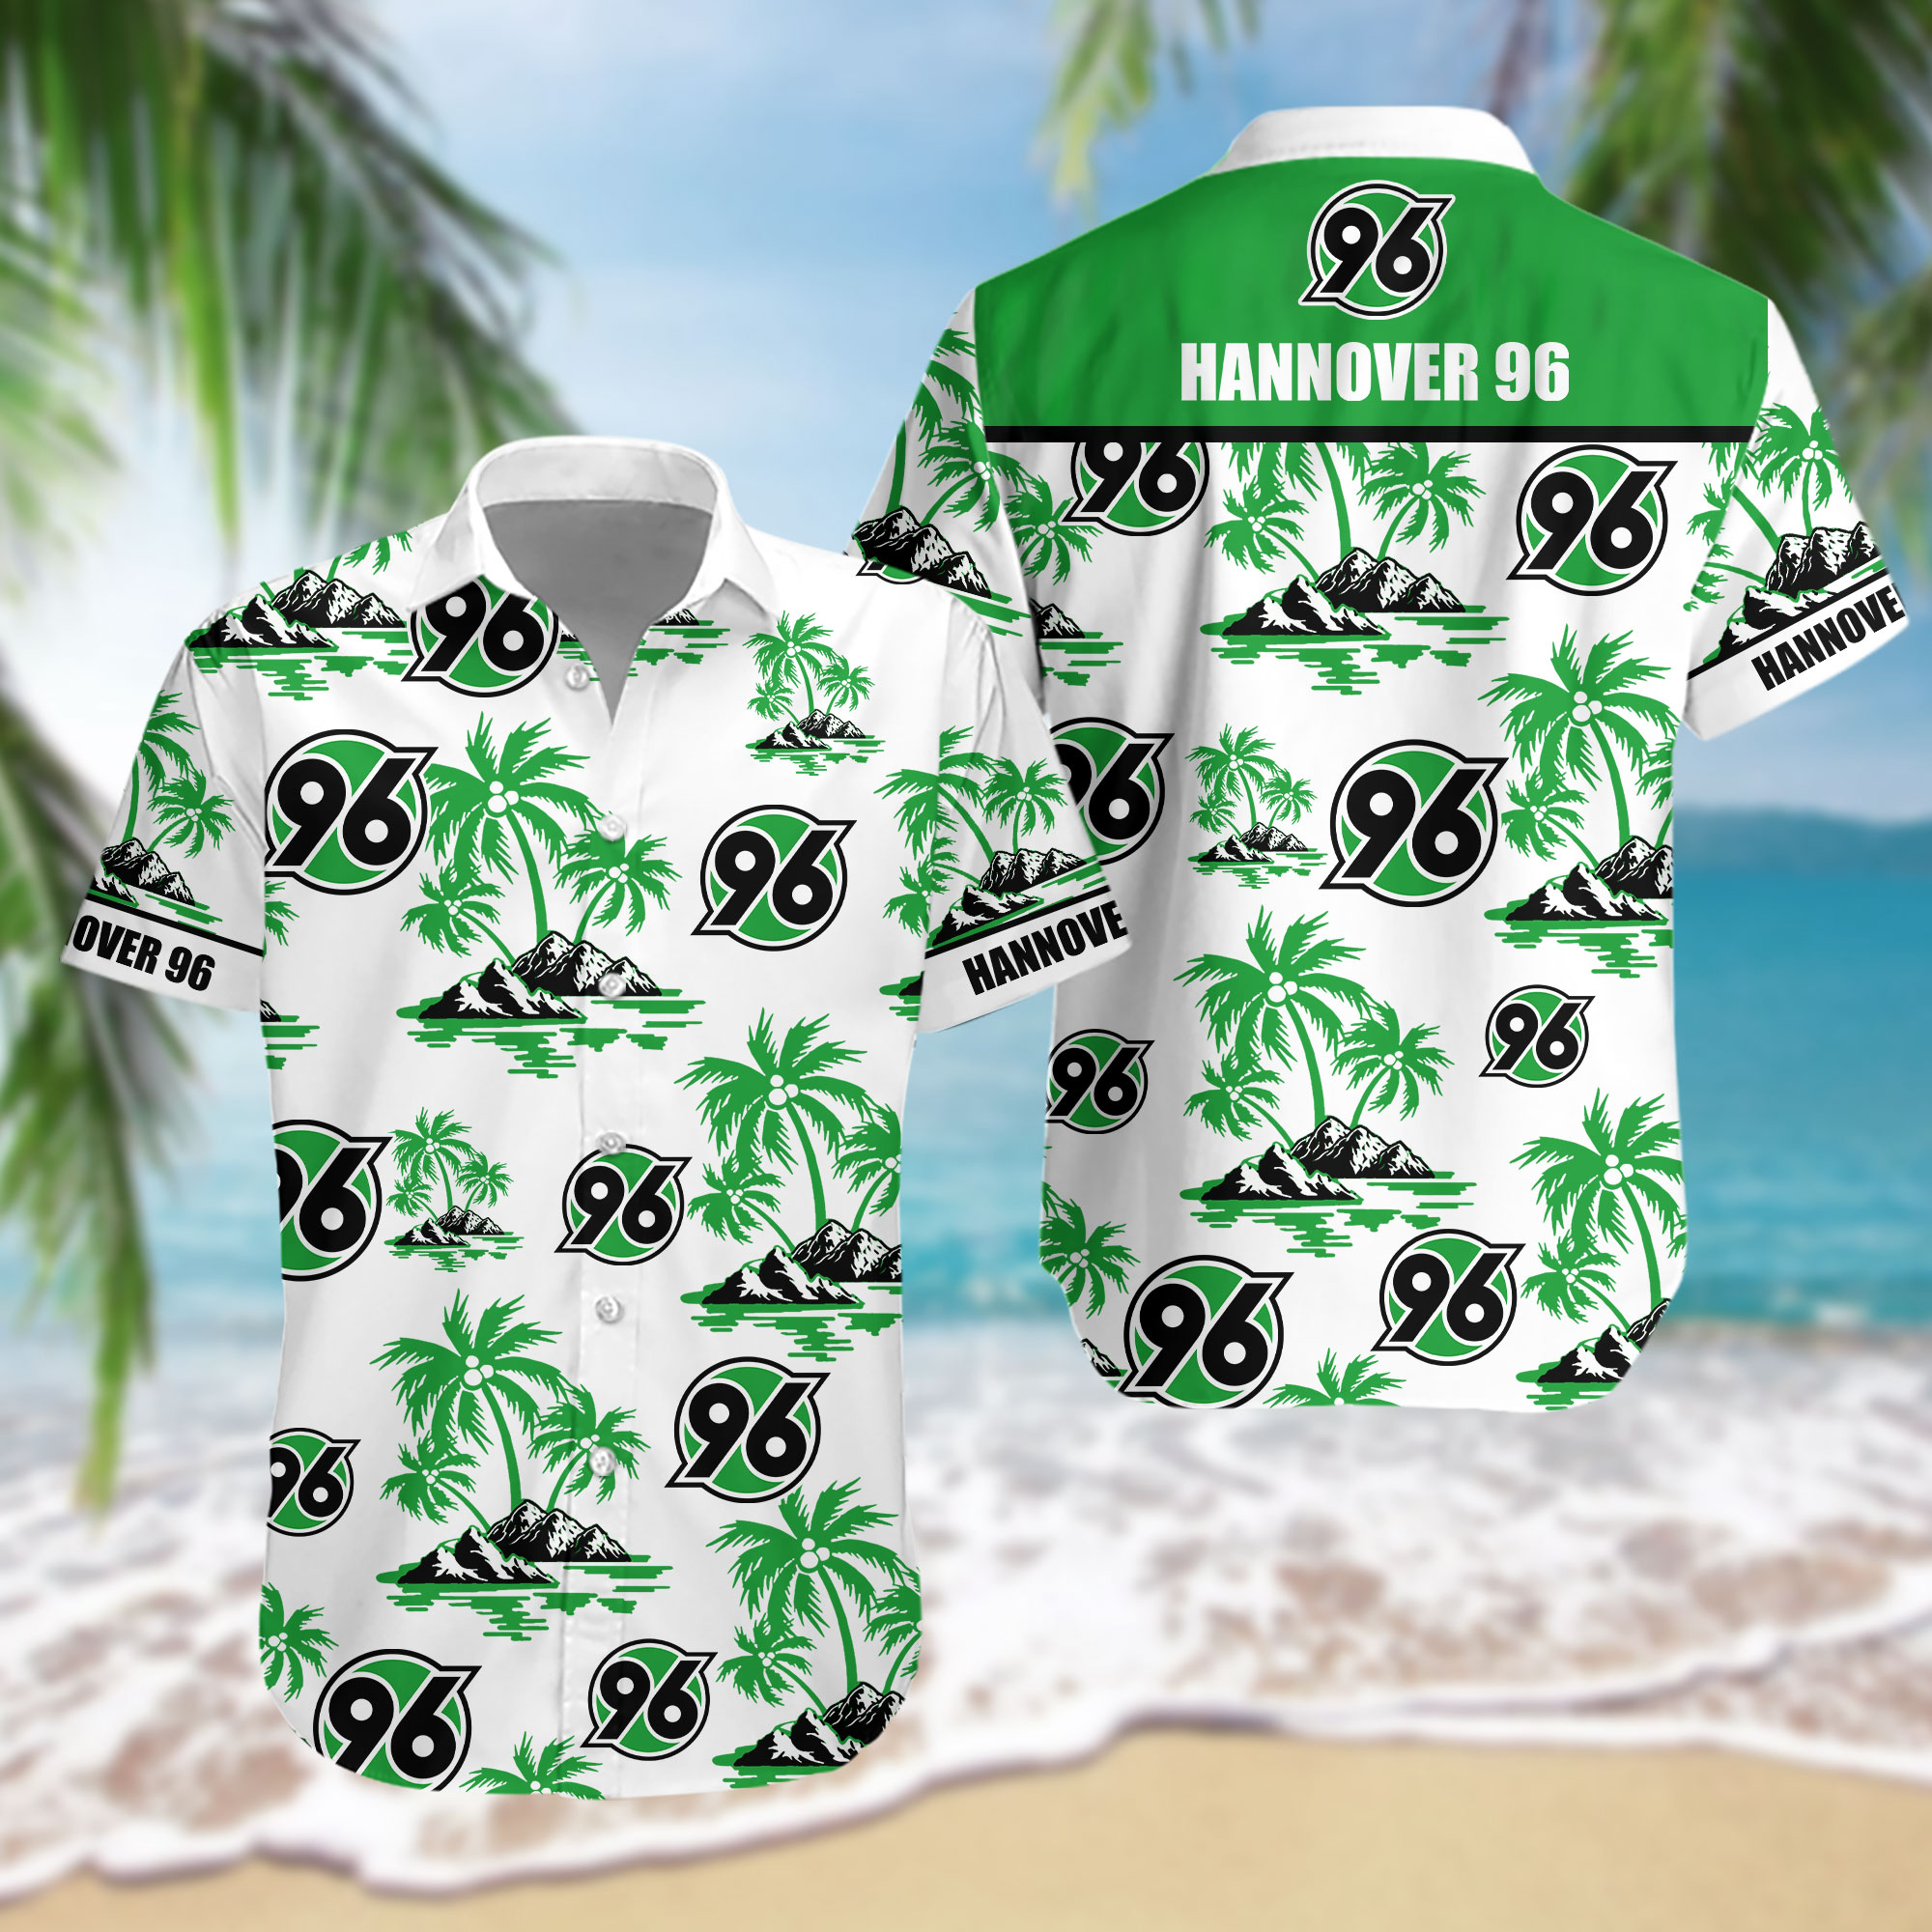 These Hawaiian Shirt will be a great choice for any type of occasion 5